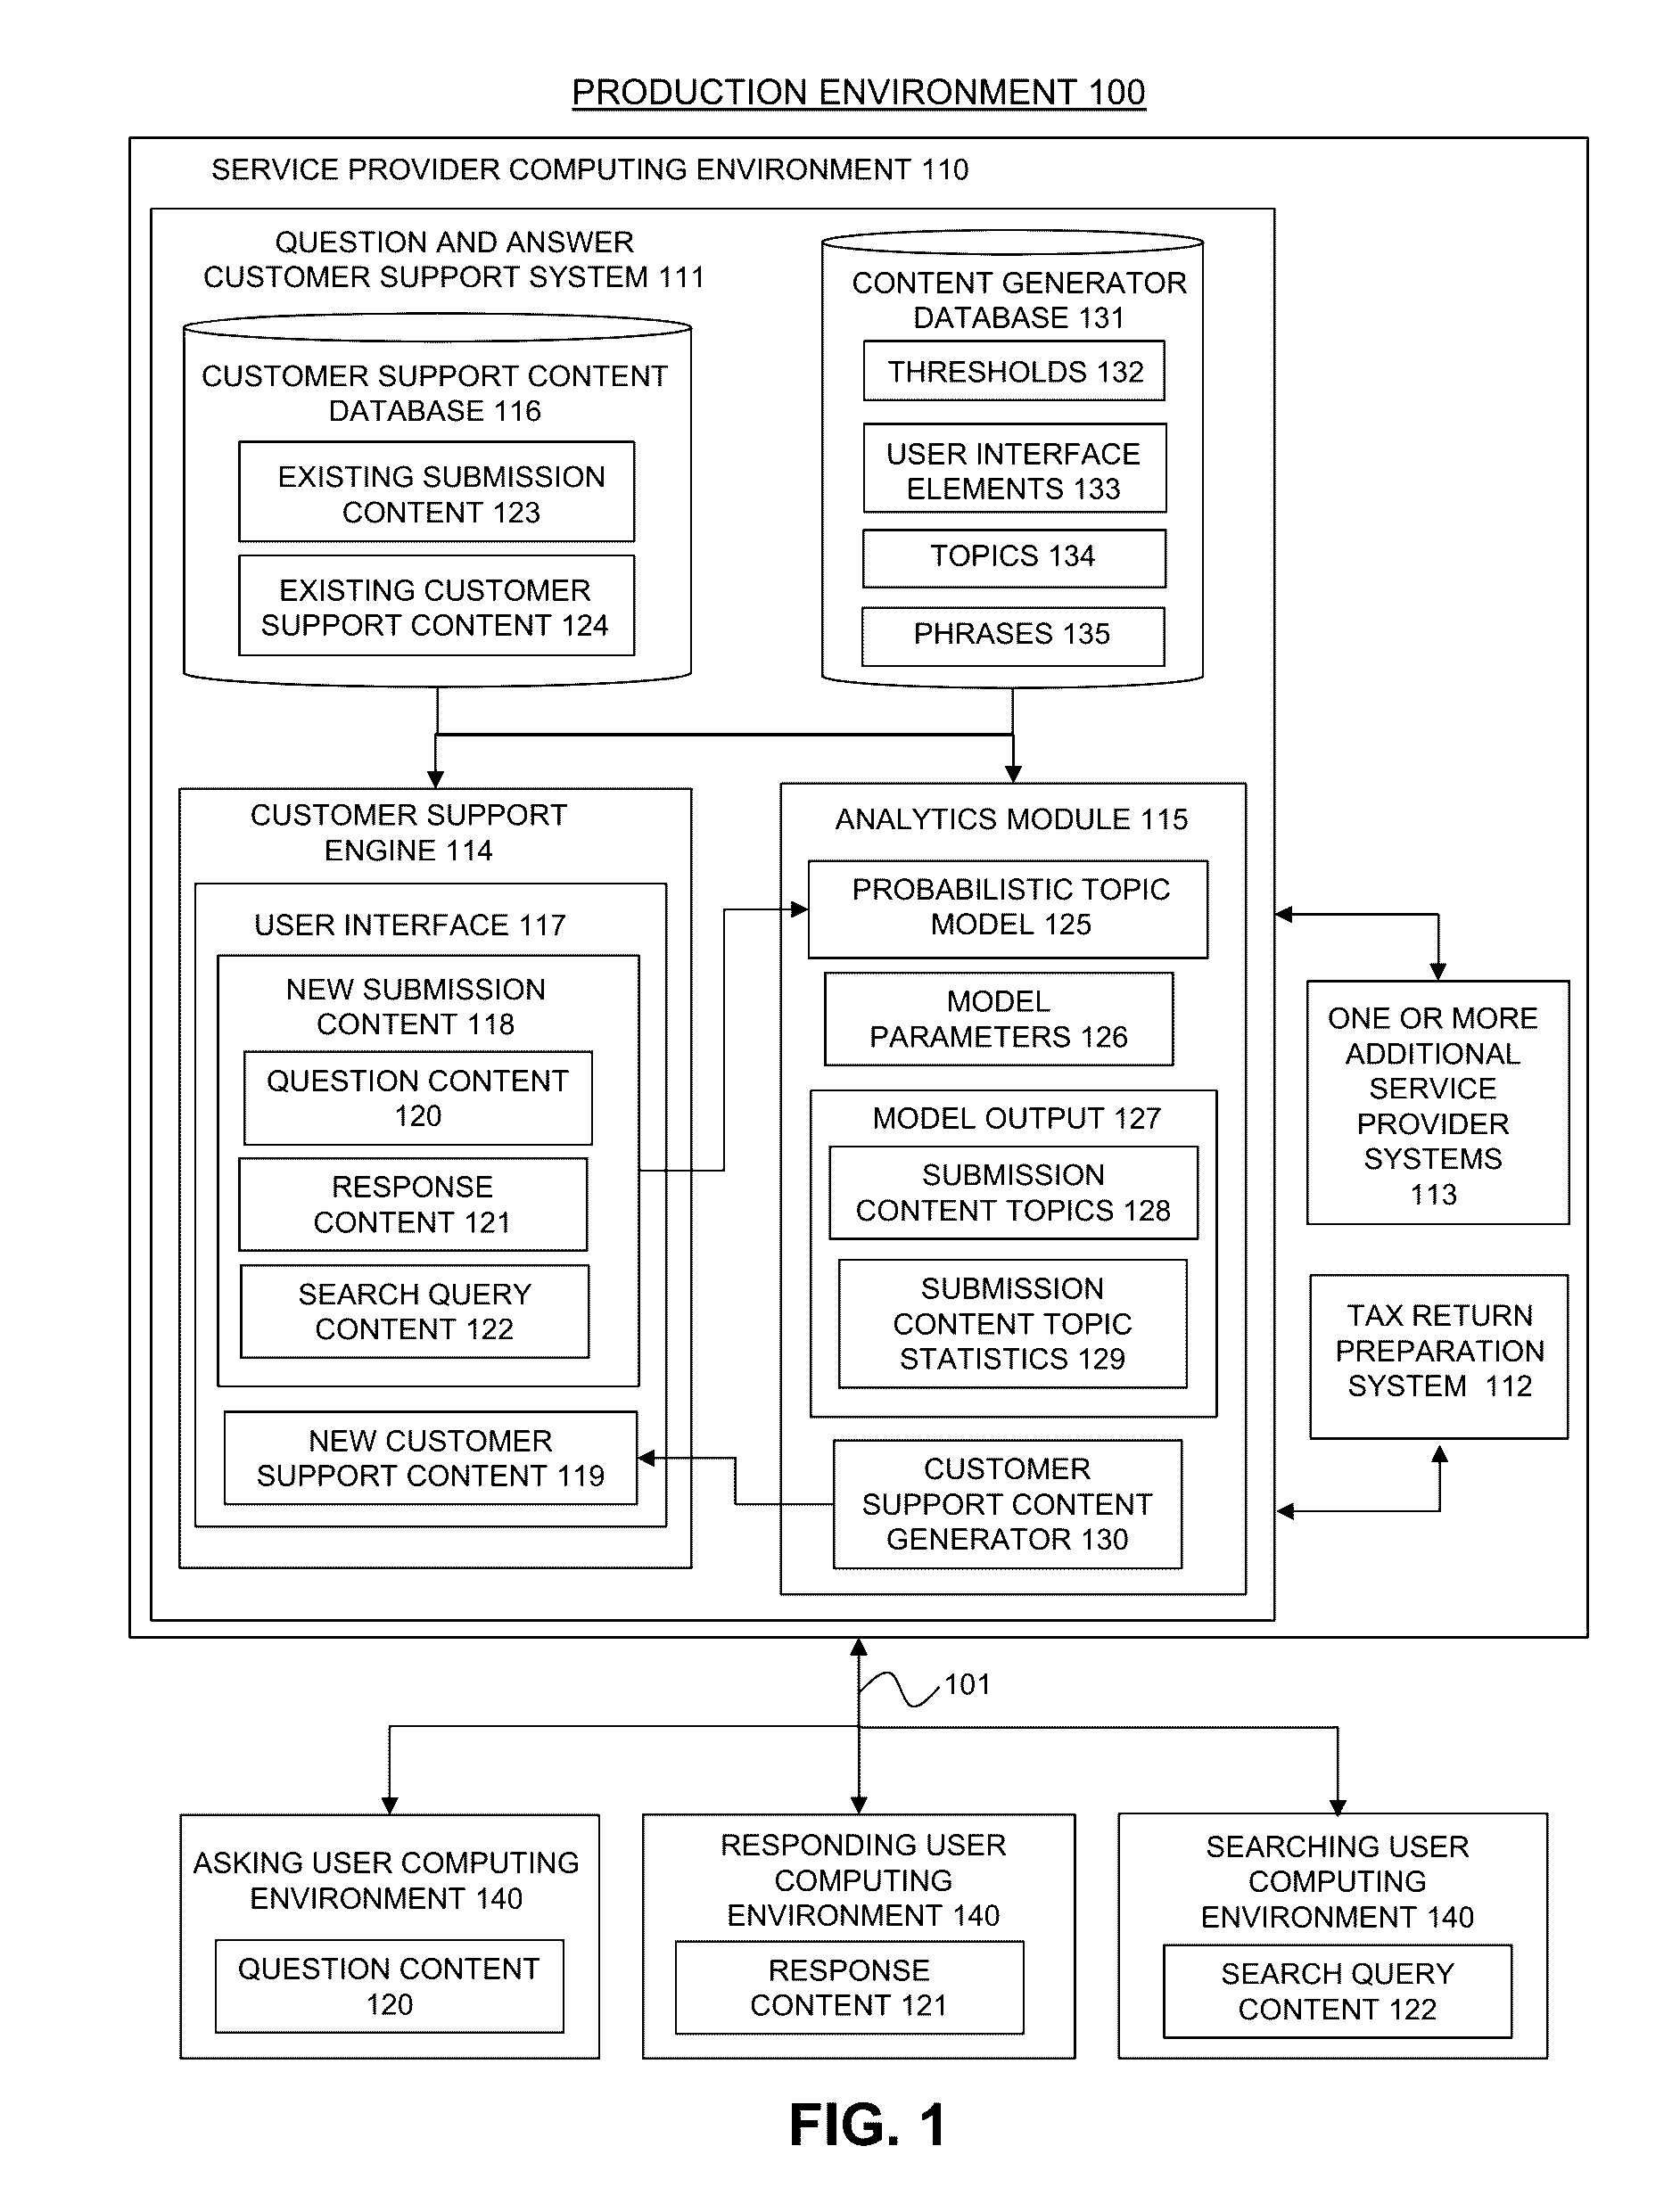 Method and system for applying probabilistic topic models to content in a tax environment to improve user satisfaction with a question and answer customer support system